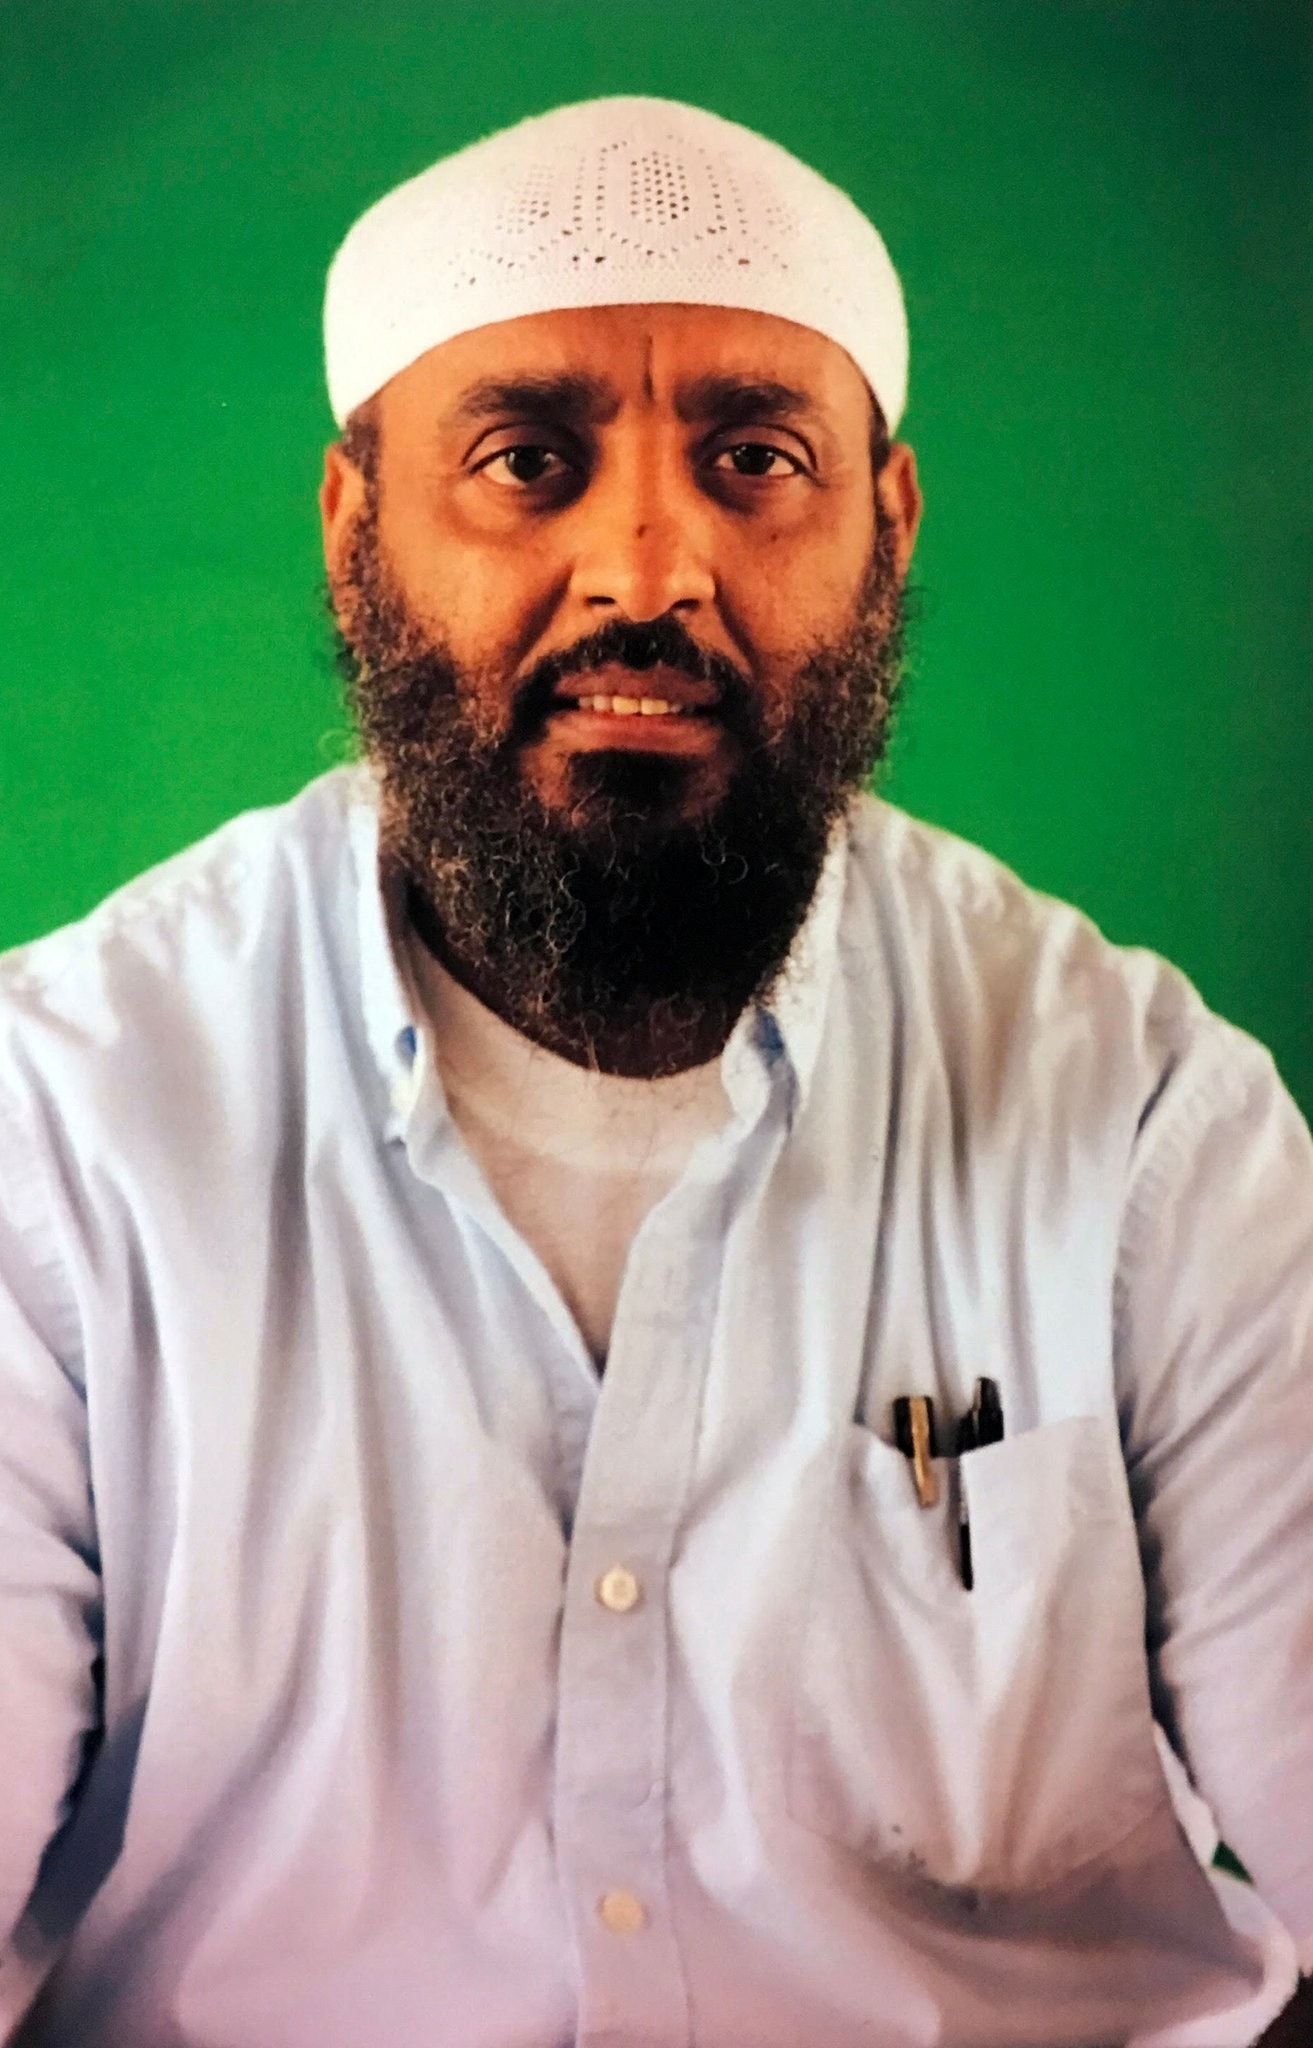 Ramzi bin al-Shibh, one of the men accused of plotting the Sept. 11 attacks, at Guantánamo Bay in 2019, in an image provided by his defense team. Image courtesy of The New York Times. United States, undated.